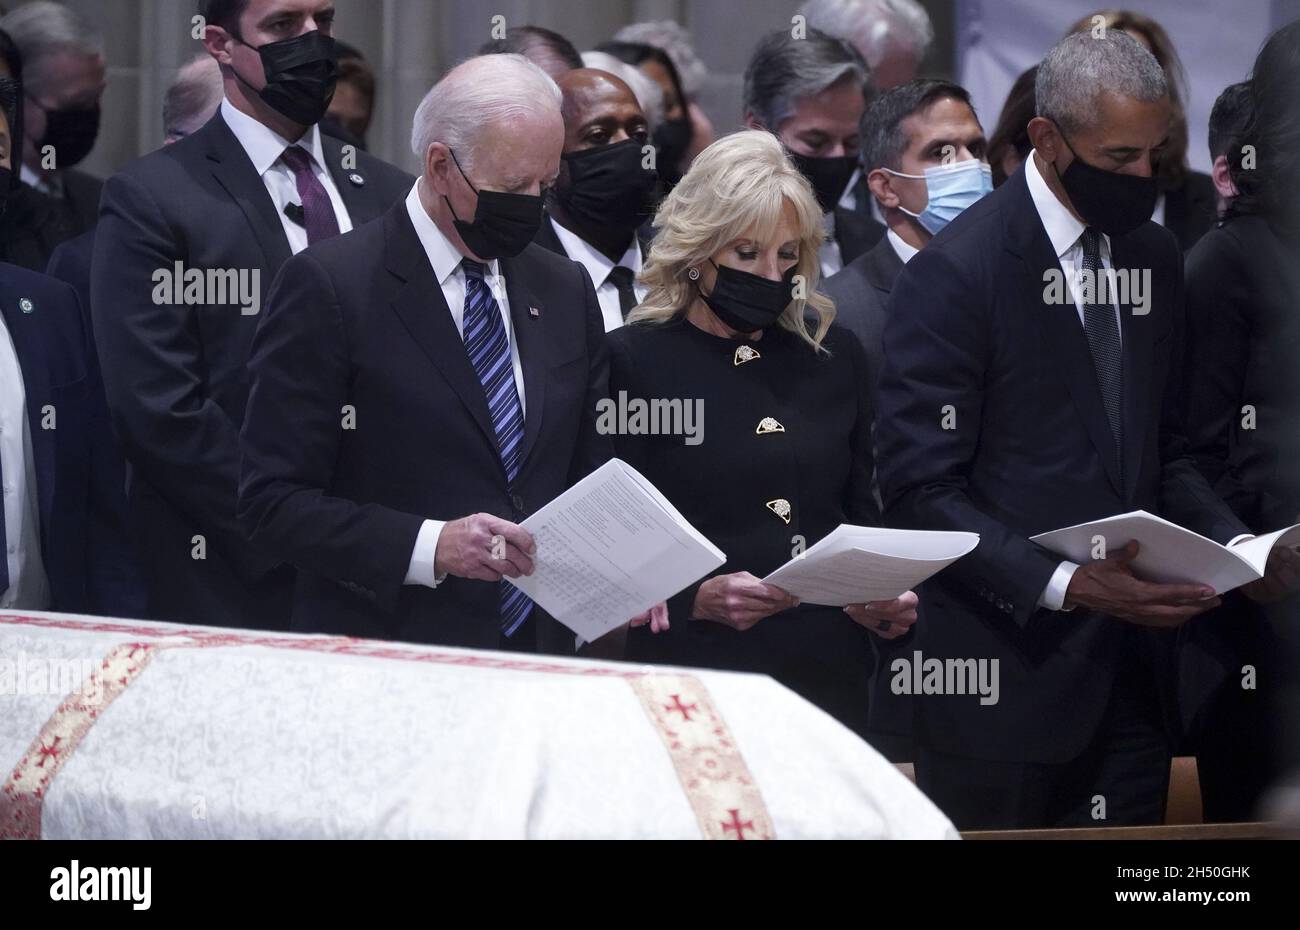 Washington DC, USA. 05th Nov, 2021. President Joe Biden, First Lady Jill Biden, and former President Barack Obama attend the funeral of Colin Powell at the National Cathedral in Washington, DC, November 5, 2021. Colin Powell died October 18, at the age of 84, of complications from COVID-19 after a battle with brain cancer. Photo Leigh Vogel/UPI Credit: UPI/Alamy Live News Stock Photo